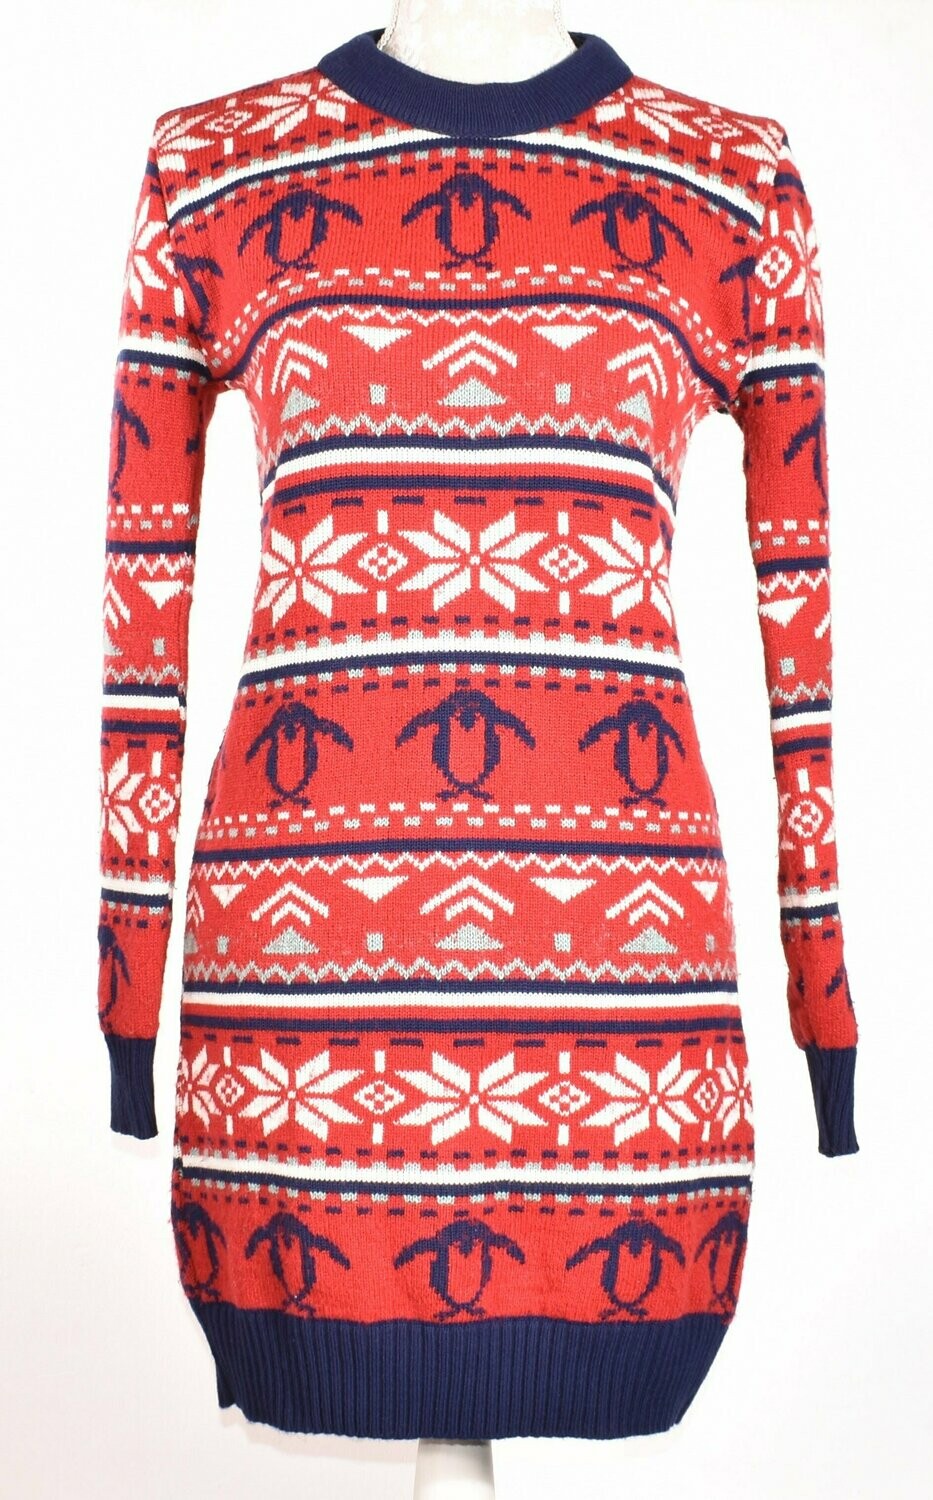 Red Xmas Patterned Vintage Jumper Dress by LOUCHE